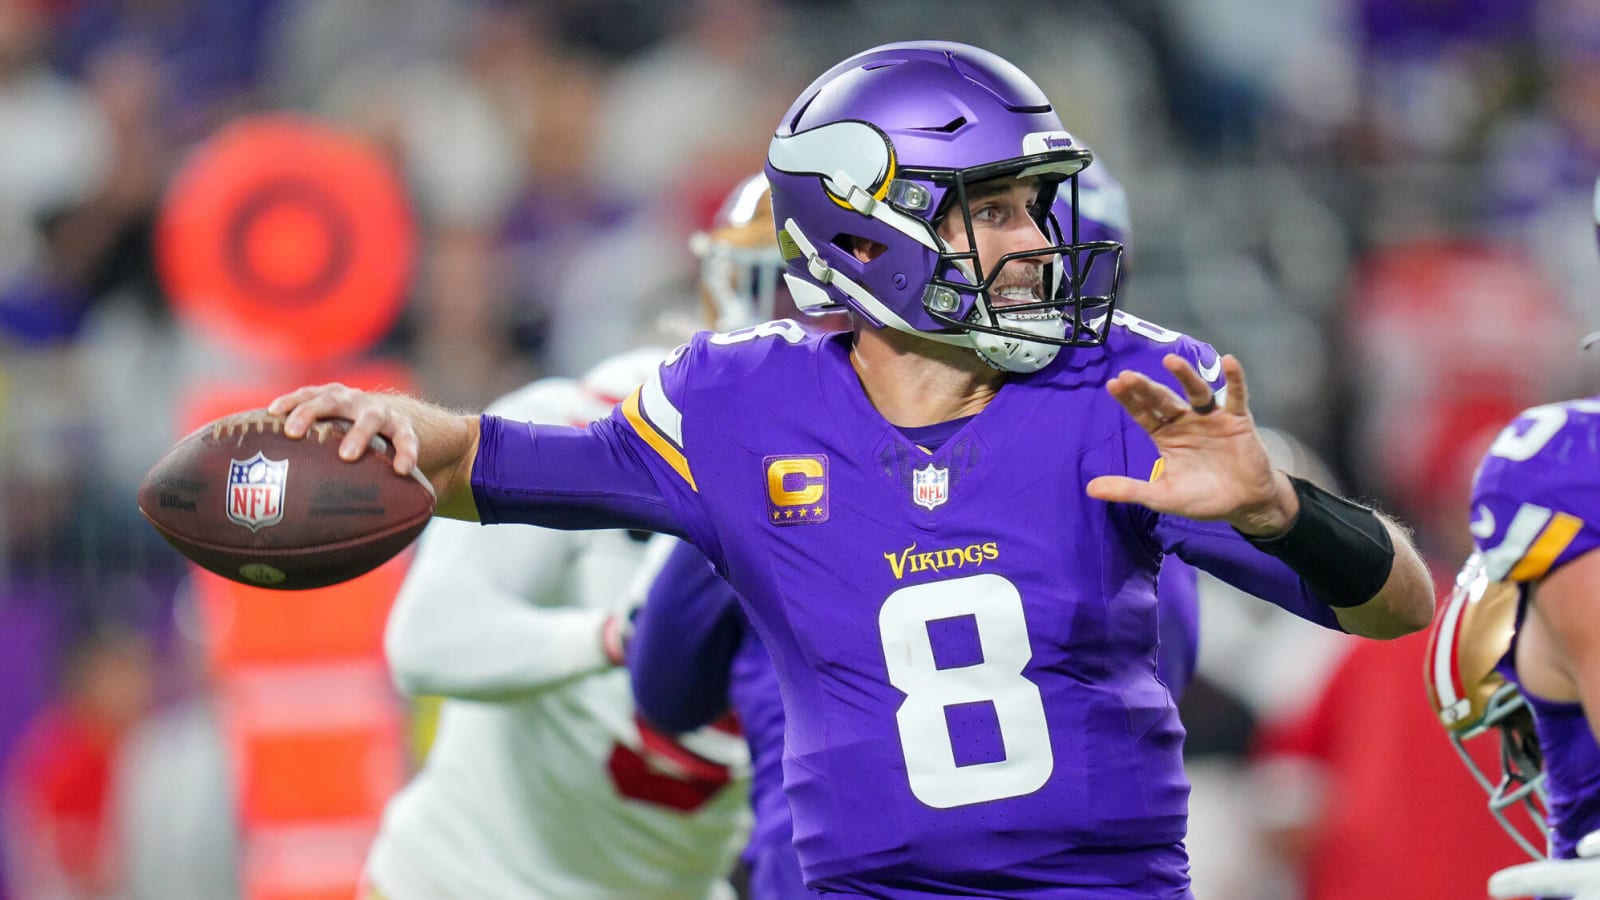 Kirk Cousins reacts to Vikings’ thrilling win